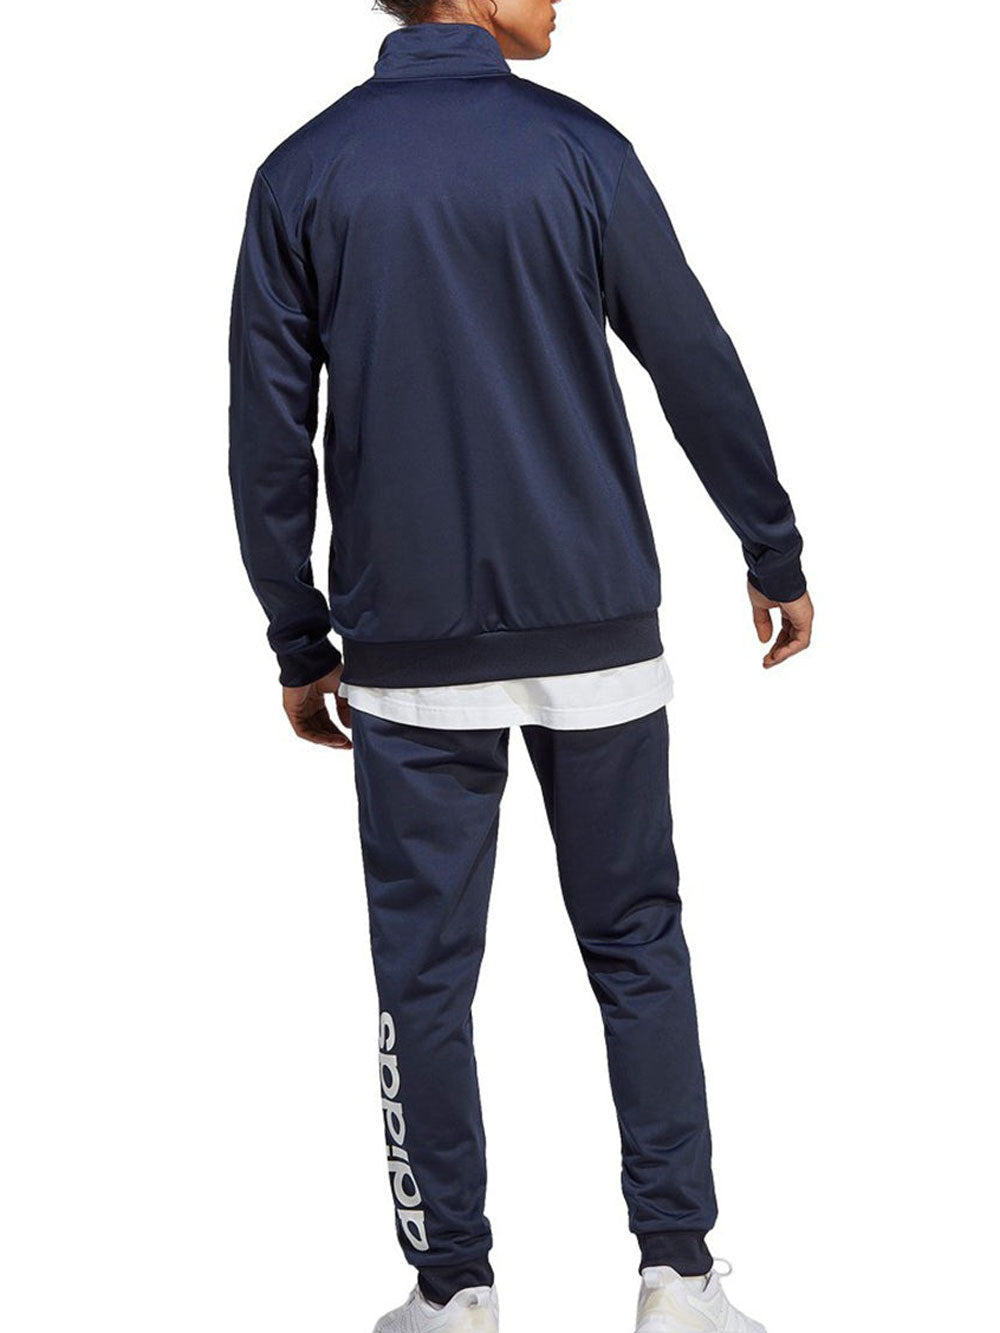 Adidas Adidas Logo Tricot Tracksuit for Men - Blue HZ2219 | Opportunity ...